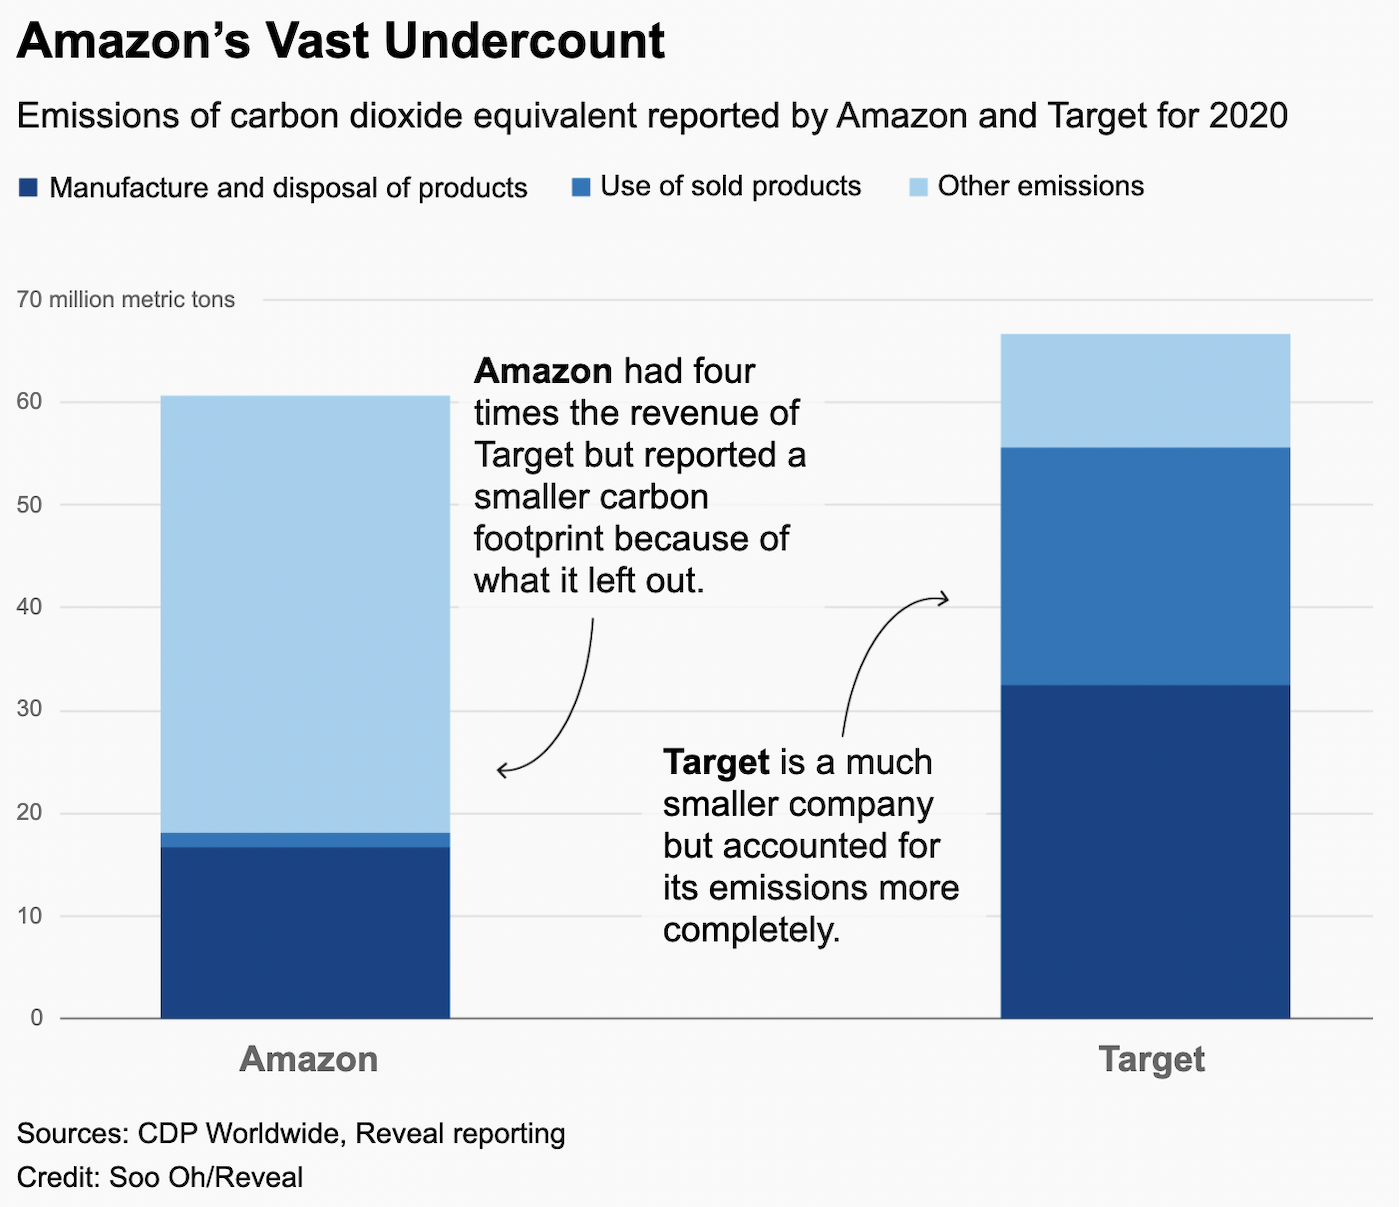 A chart showing Amazon had four times the revenue of Target but reported a smaller carbon footprint because of what it left out.